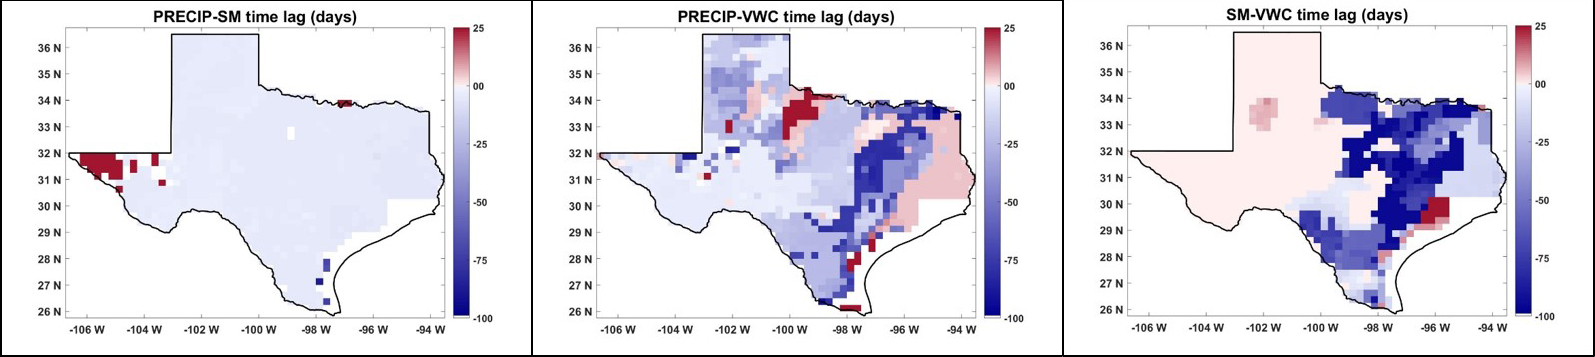 maps of texas showing calculating the cross-correlation function (ccf) and the time lag (shift of one hydrologic attribute relative to the other, in the time domain) at which ccf becomes maximum